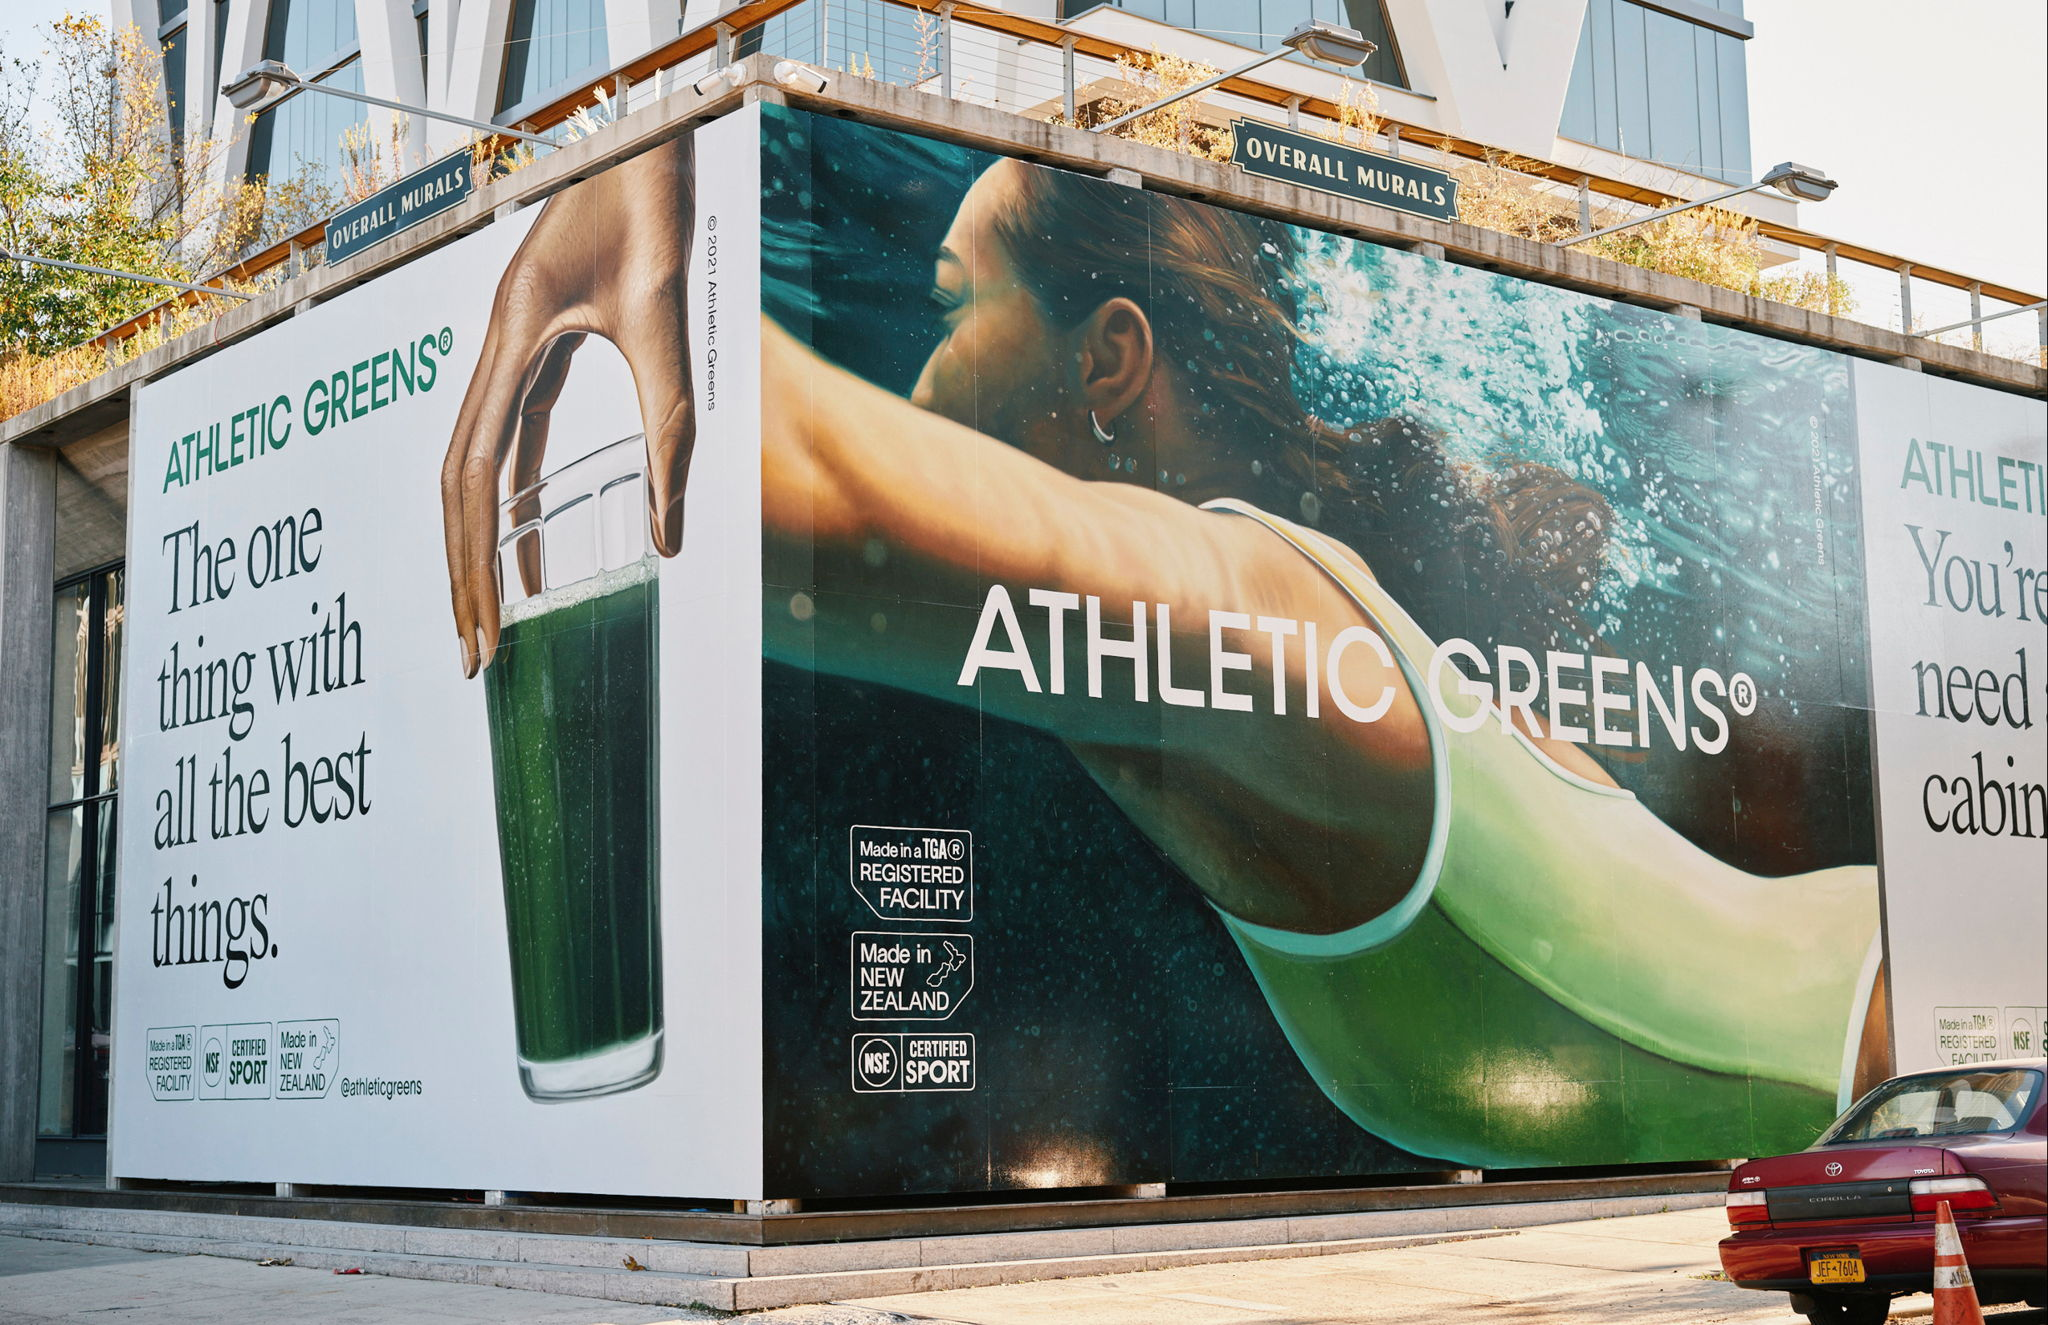 Print ad of Athletic Greens, one side shows someone picking up a glass with the text "the one thing with all the best things" and the other side shows a woman swimming.